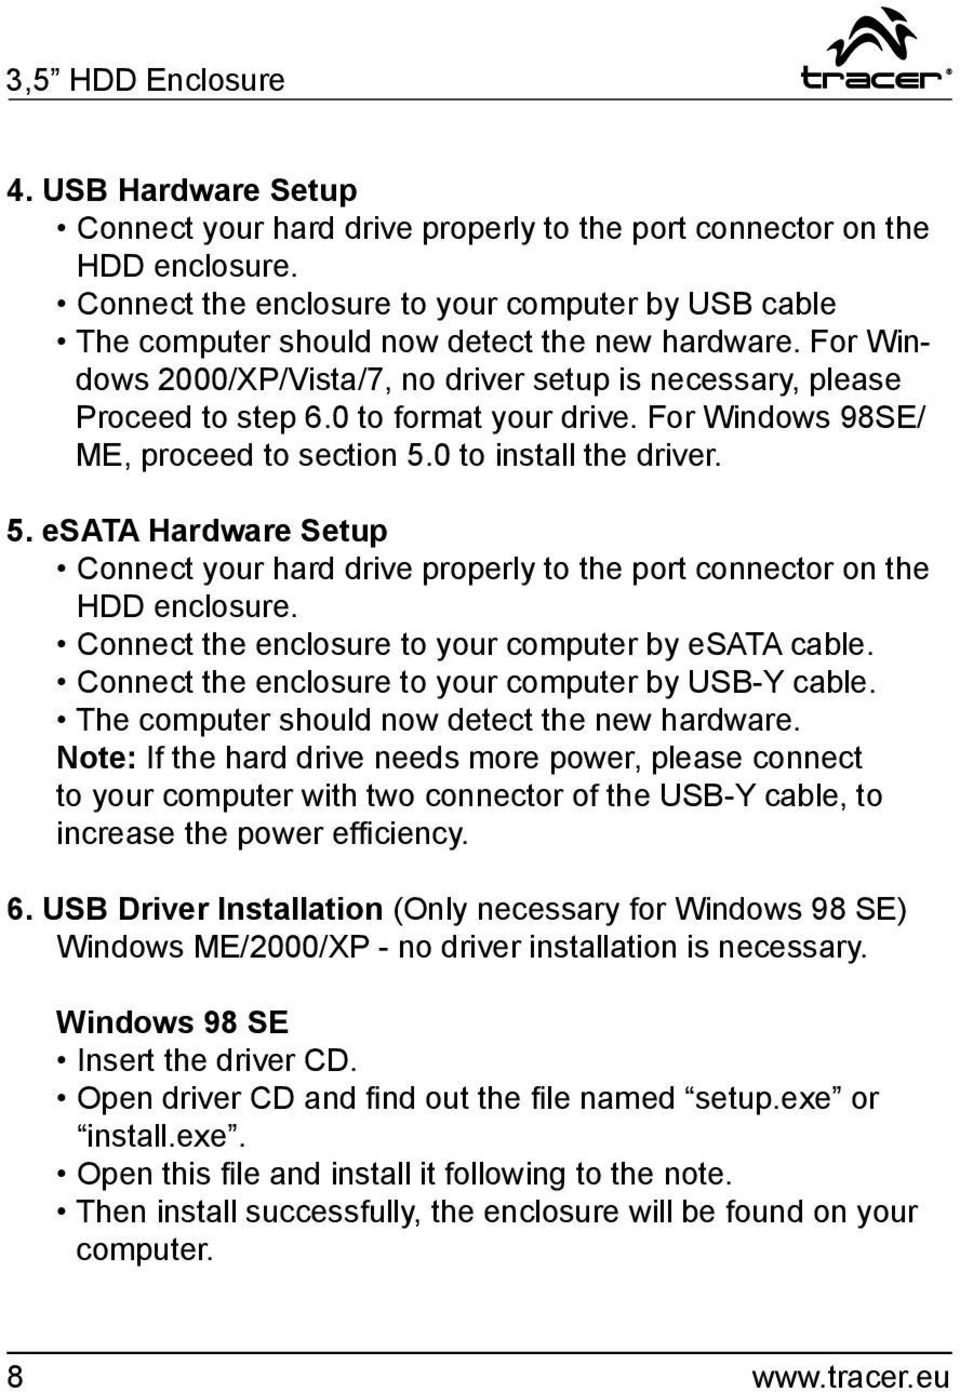 0 to format your drive. For Windows 98SE/ ME, proceed to section 5.0 to install the driver. 5. esata Hardware Setup Connect your hard drive properly to the port connector on the HDD enclosure.